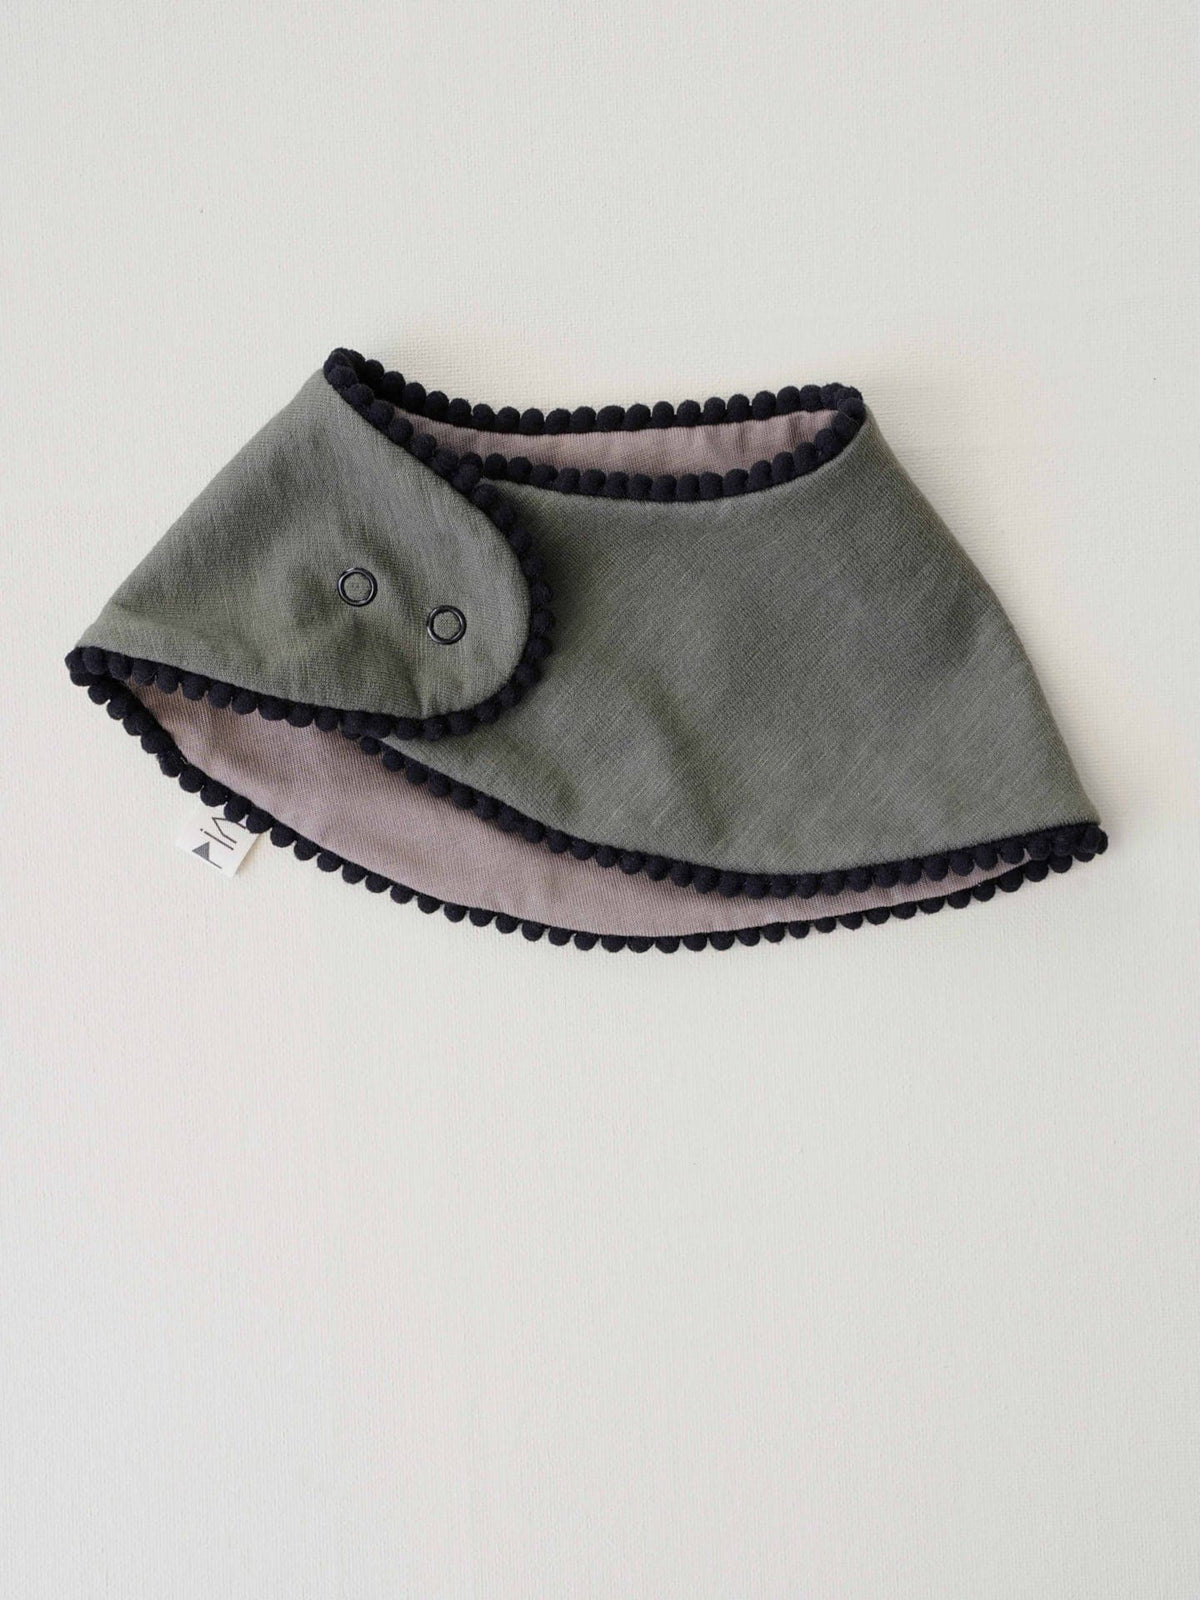 A Baby Gift Box - Forest bib with black trim from Peppin.